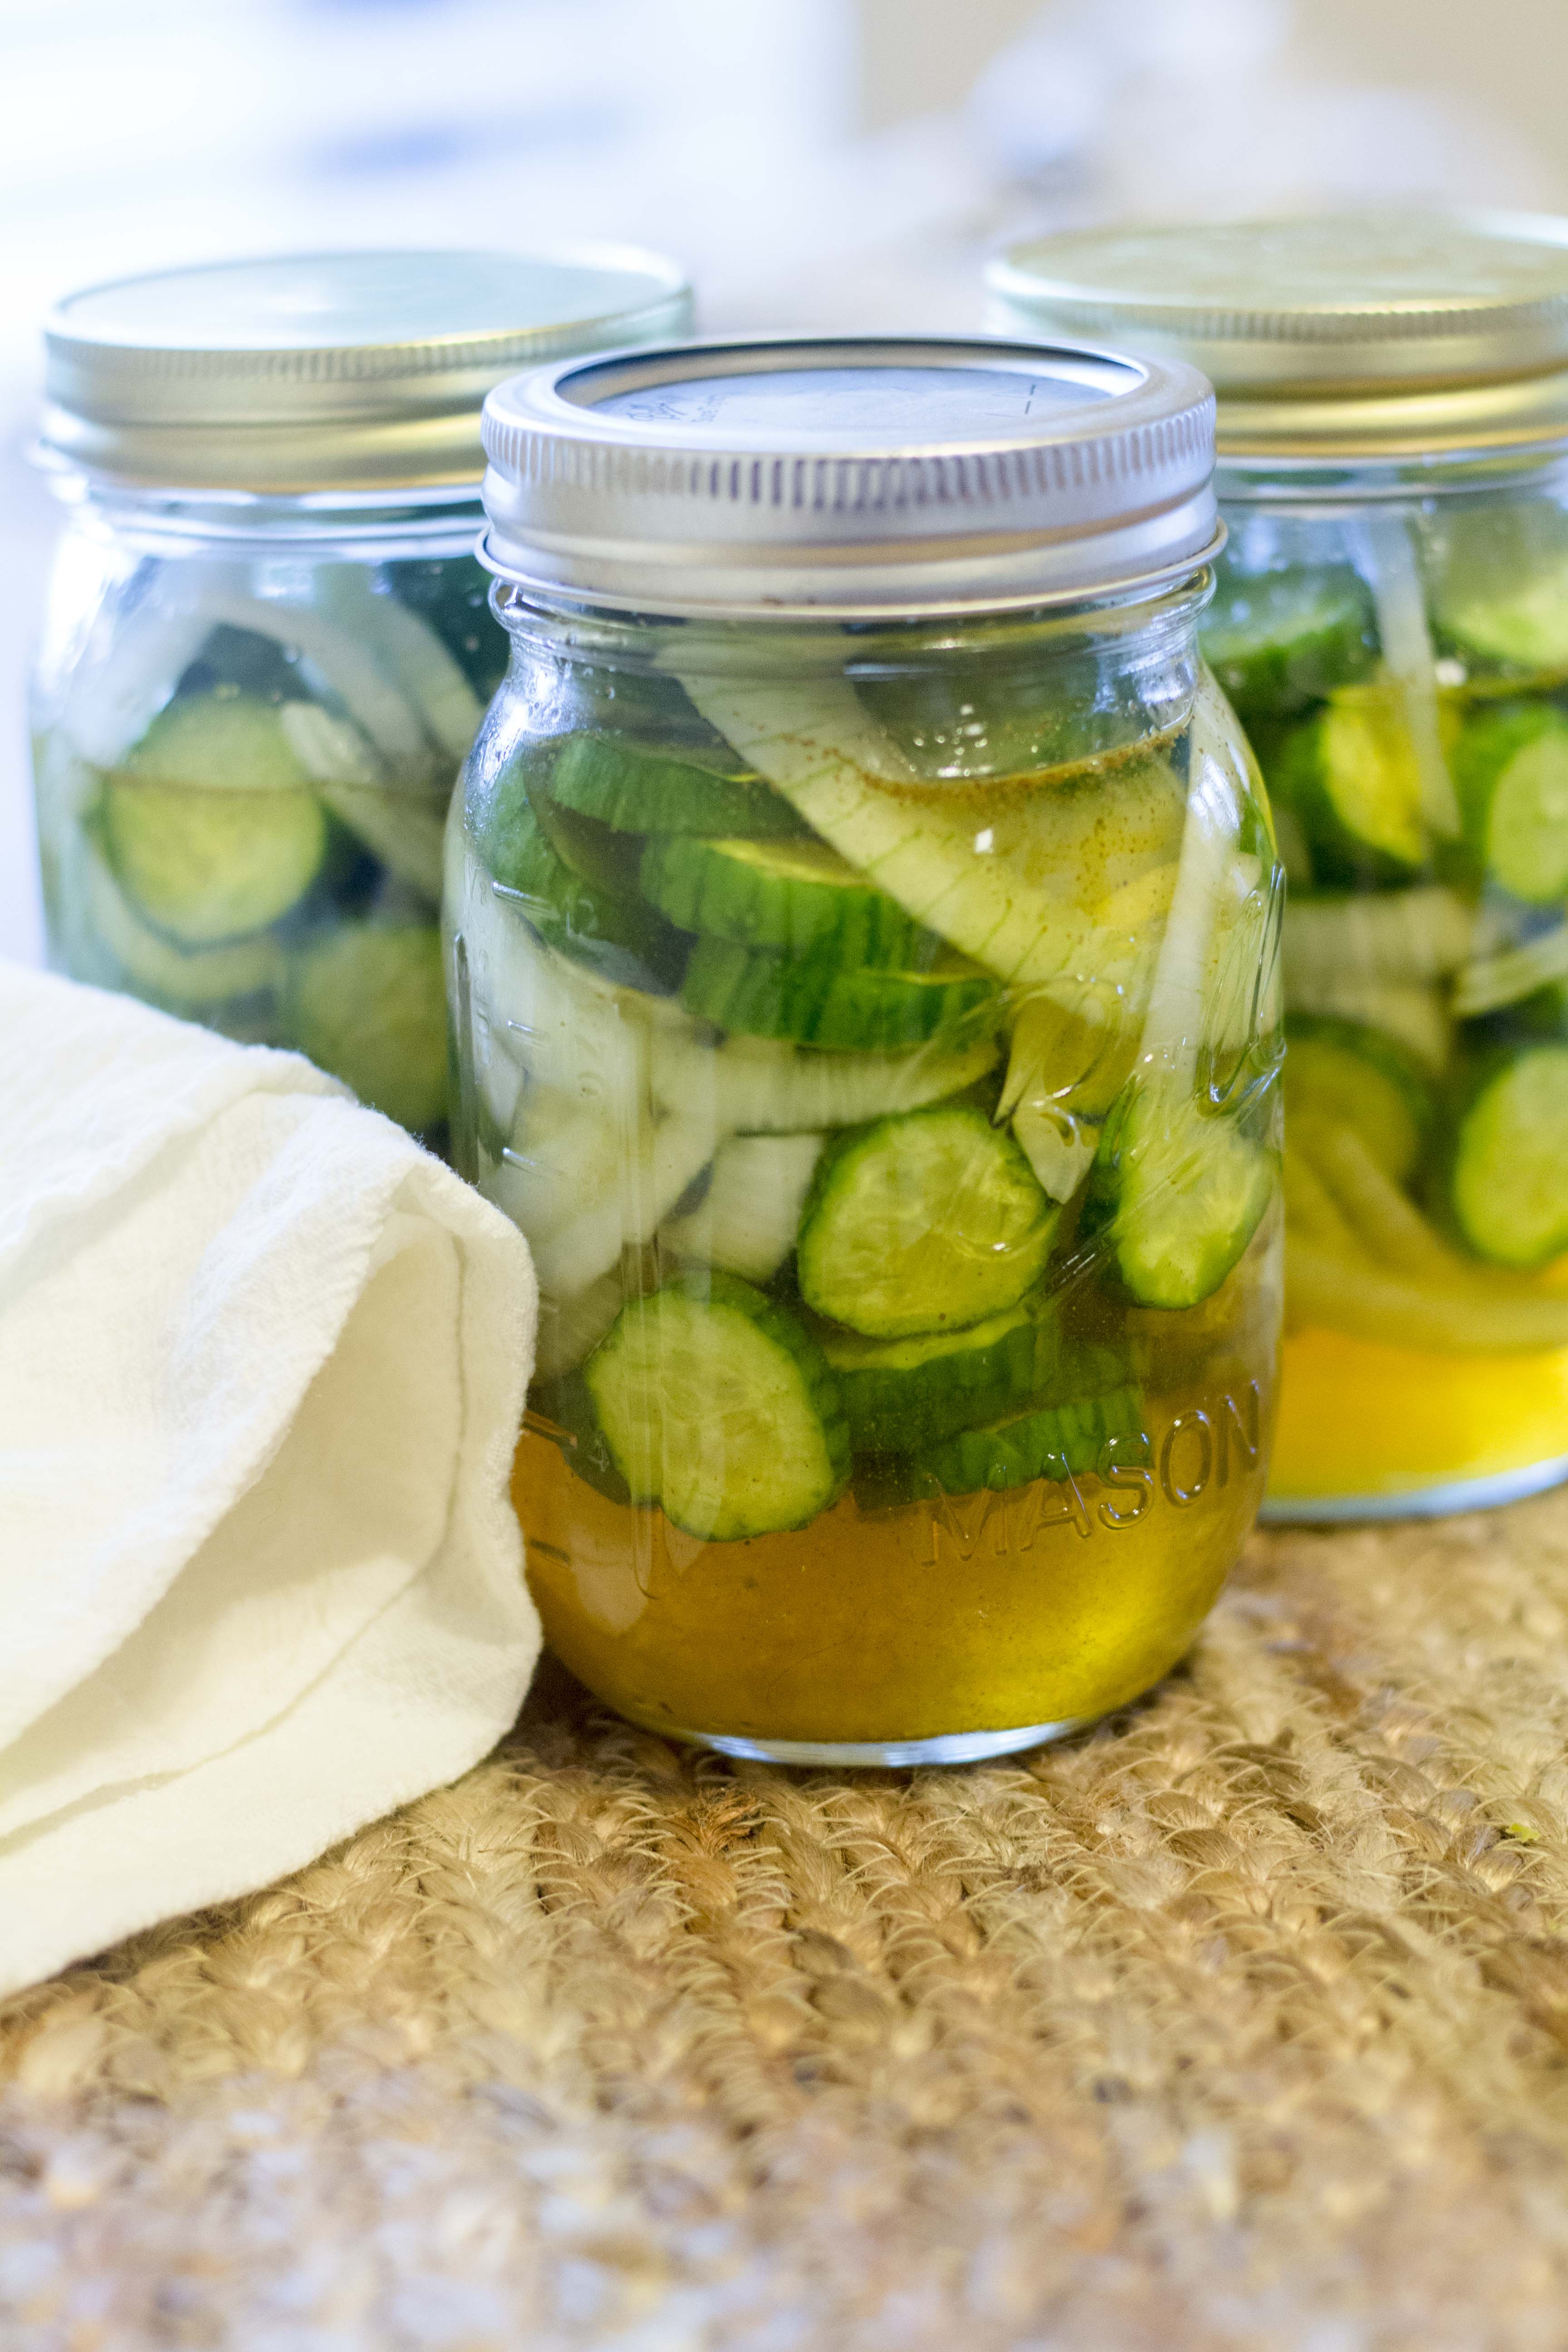 How to Make Pickles in Your Refrigerator